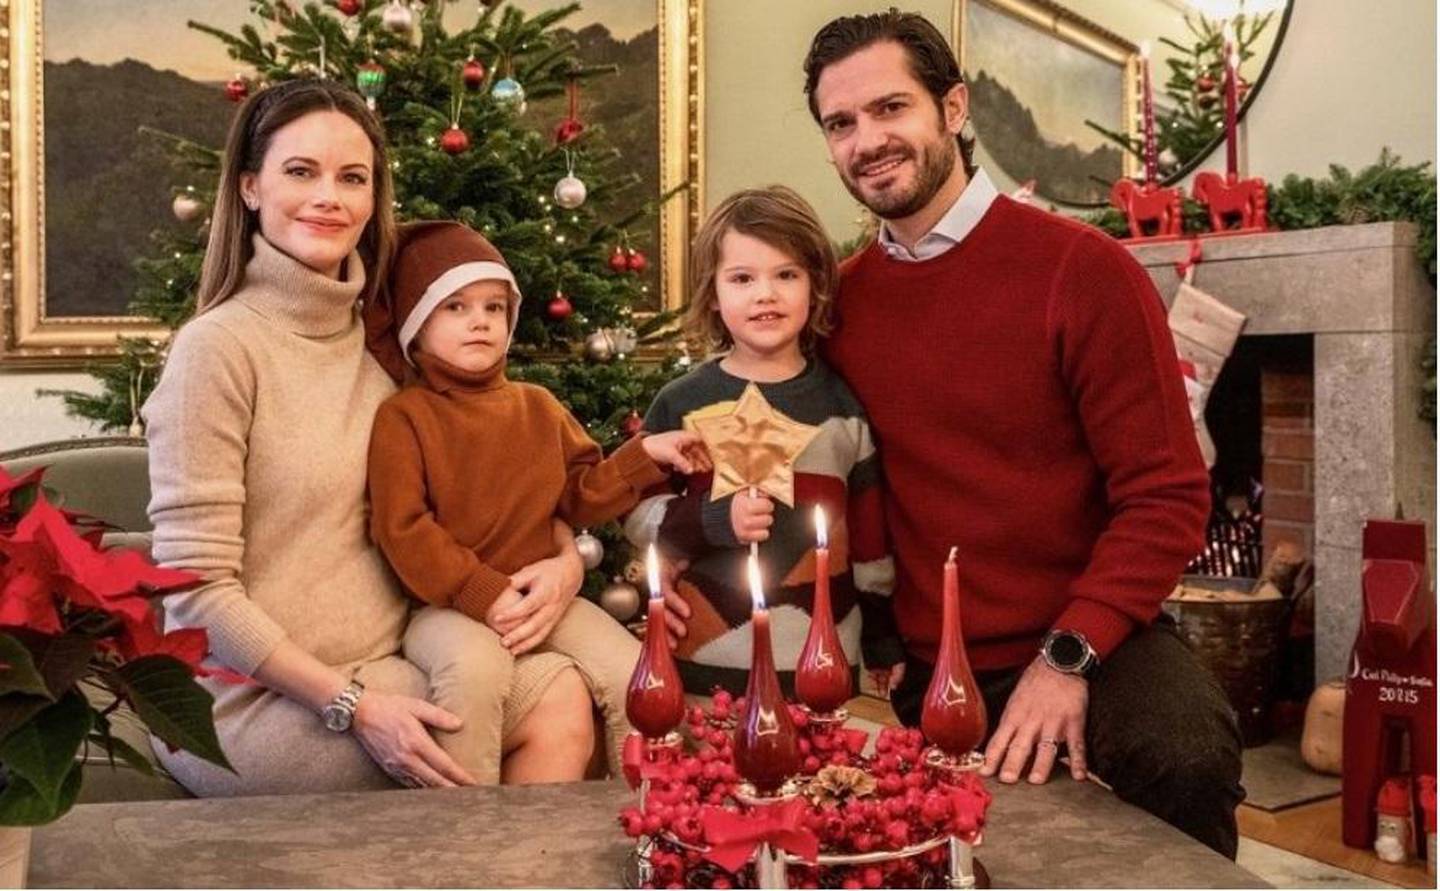 Prince Carl Philip and Princess Sofia of Sweden shared this photo, along with the Princes Alexander and Gabriel to commemorate St Lucia's Day. Victor Ericsson / Kungl. Hovstaterna